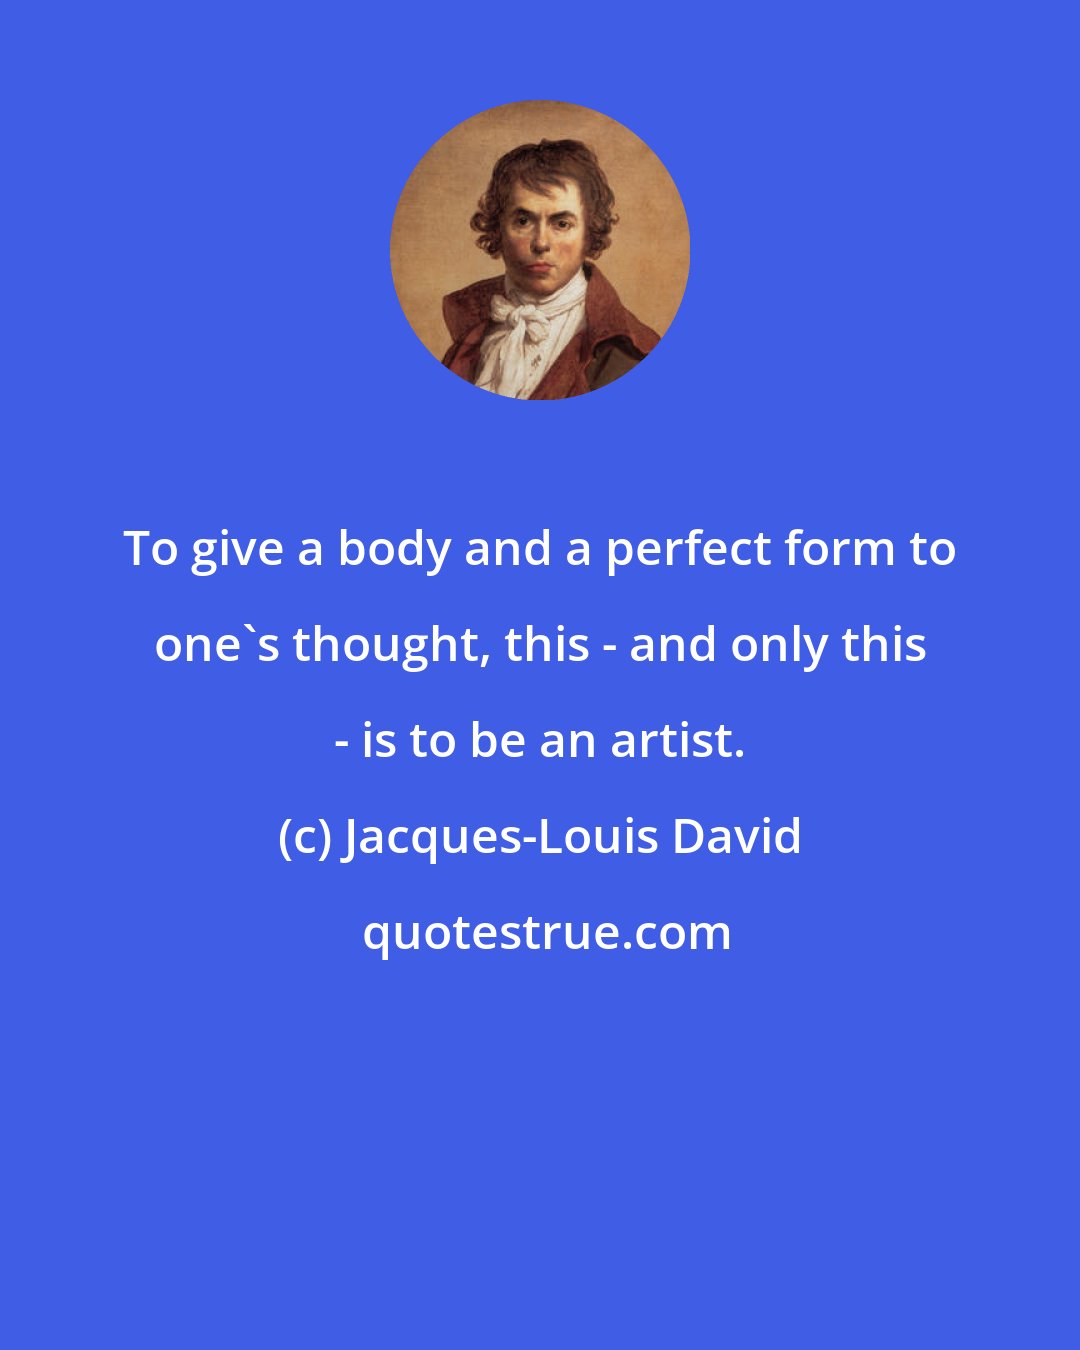 Jacques-Louis David: To give a body and a perfect form to one's thought, this - and only this - is to be an artist.